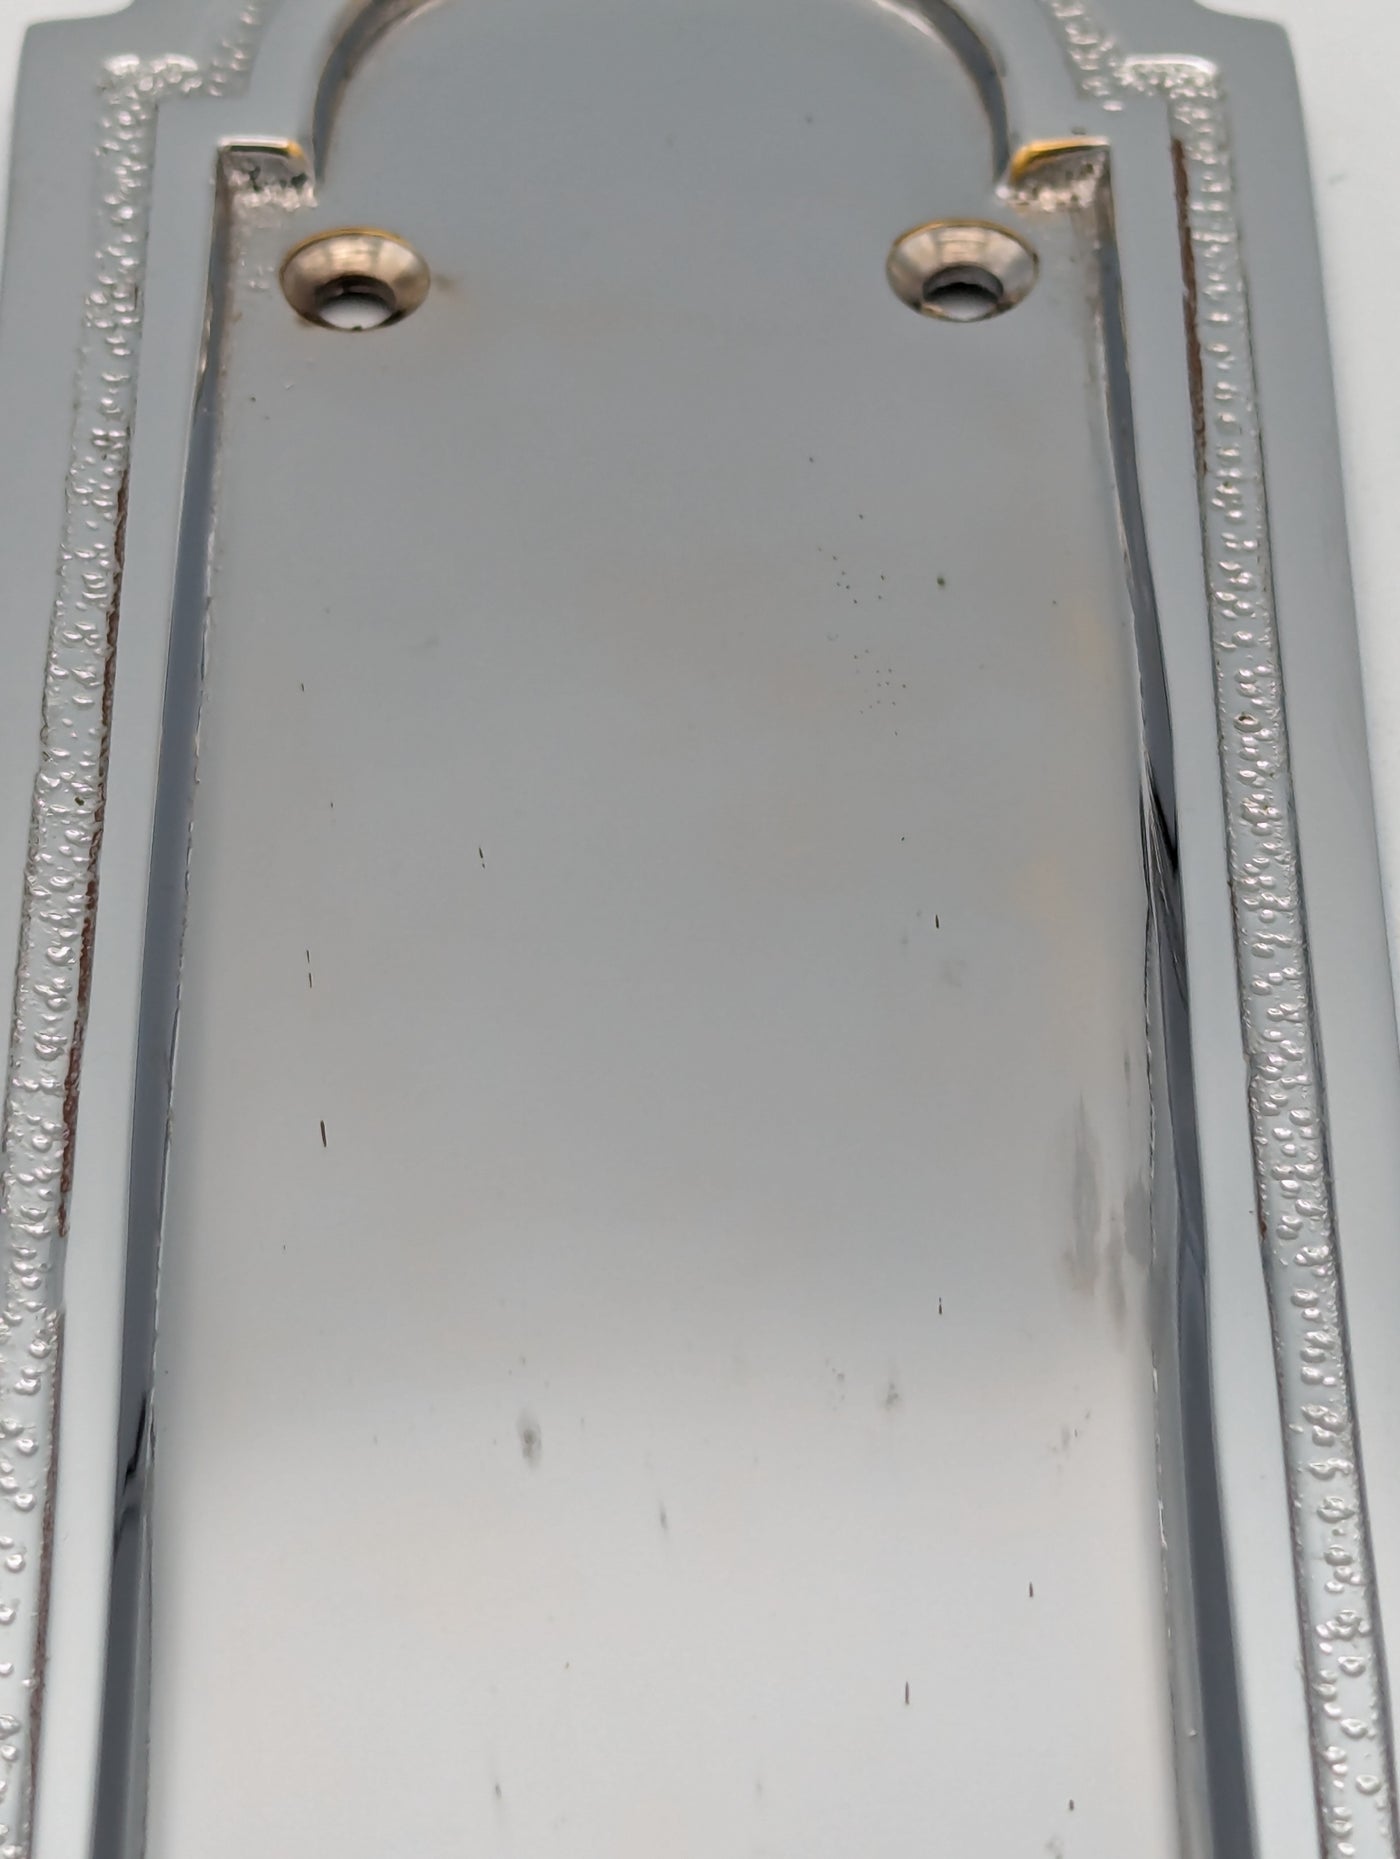 Open Box Sale Item 8 3/8 Inch Solid Brass Rounded Georgian Pattern Push Plate (Polished Chrome Finish)